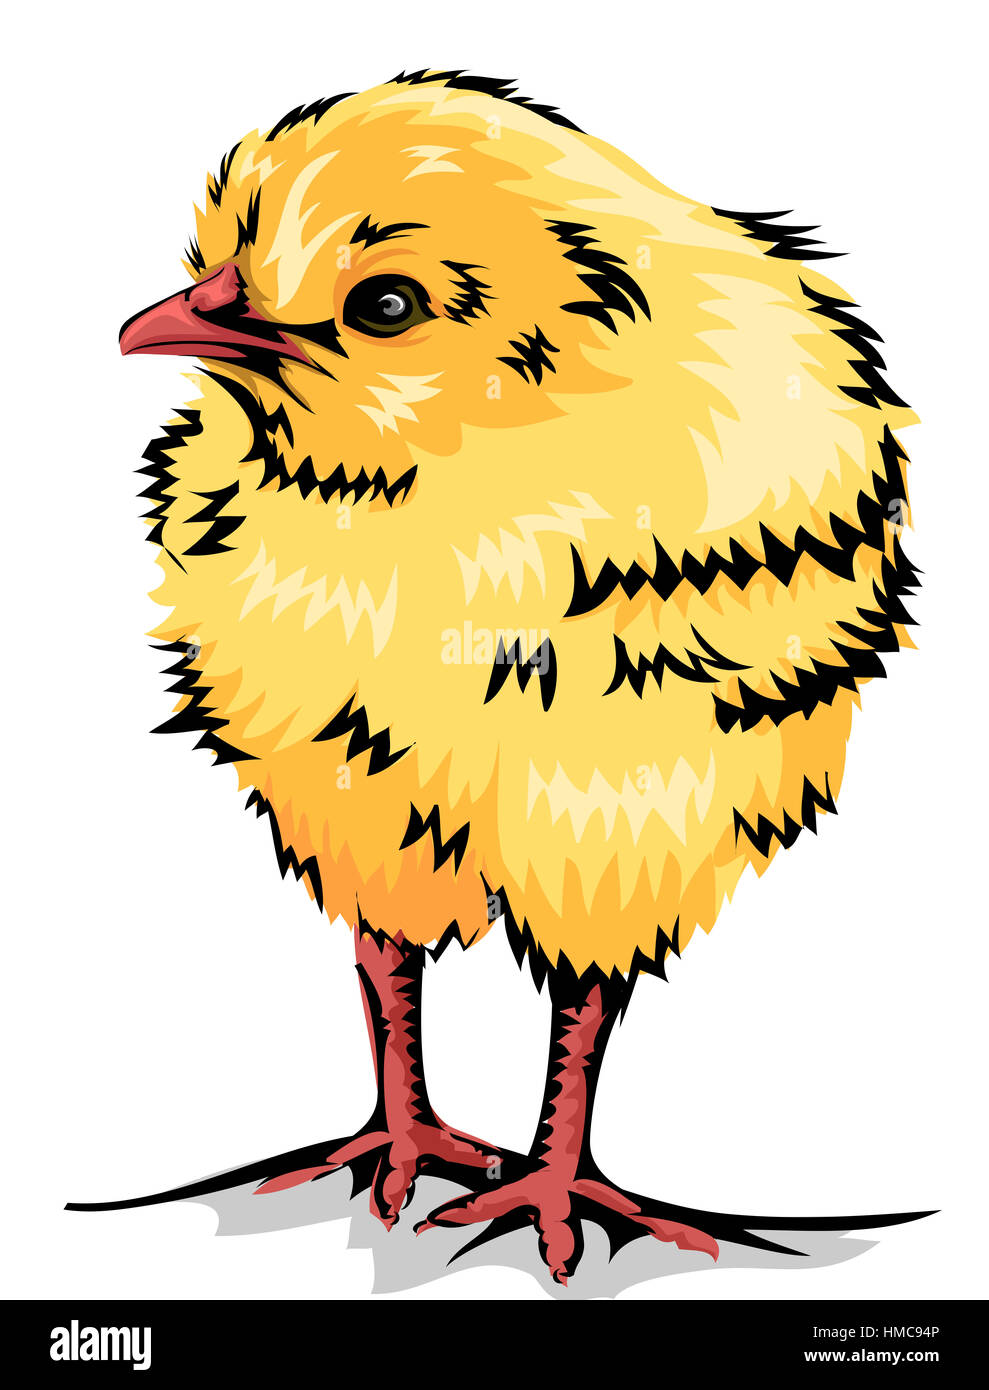 Animal Illustration of a Cute Yellow Chick Stock Photo